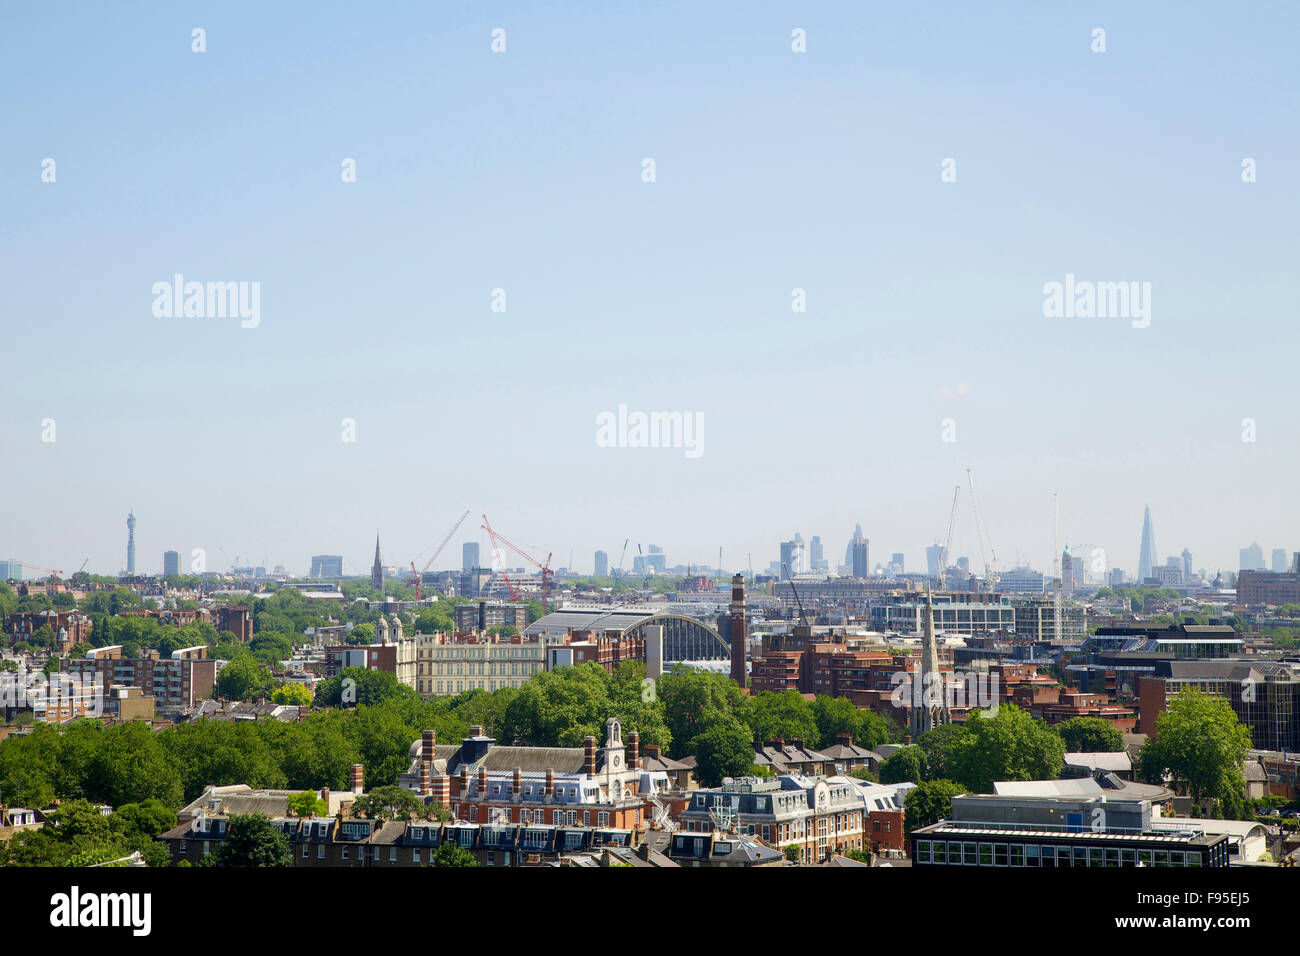 10 Hammersmith Grove W6 London. New office development by Wates Construction for Development Securities in Hammersmith, London. View of London from an office building in Hammersmith. Urban scene. Stock Photo